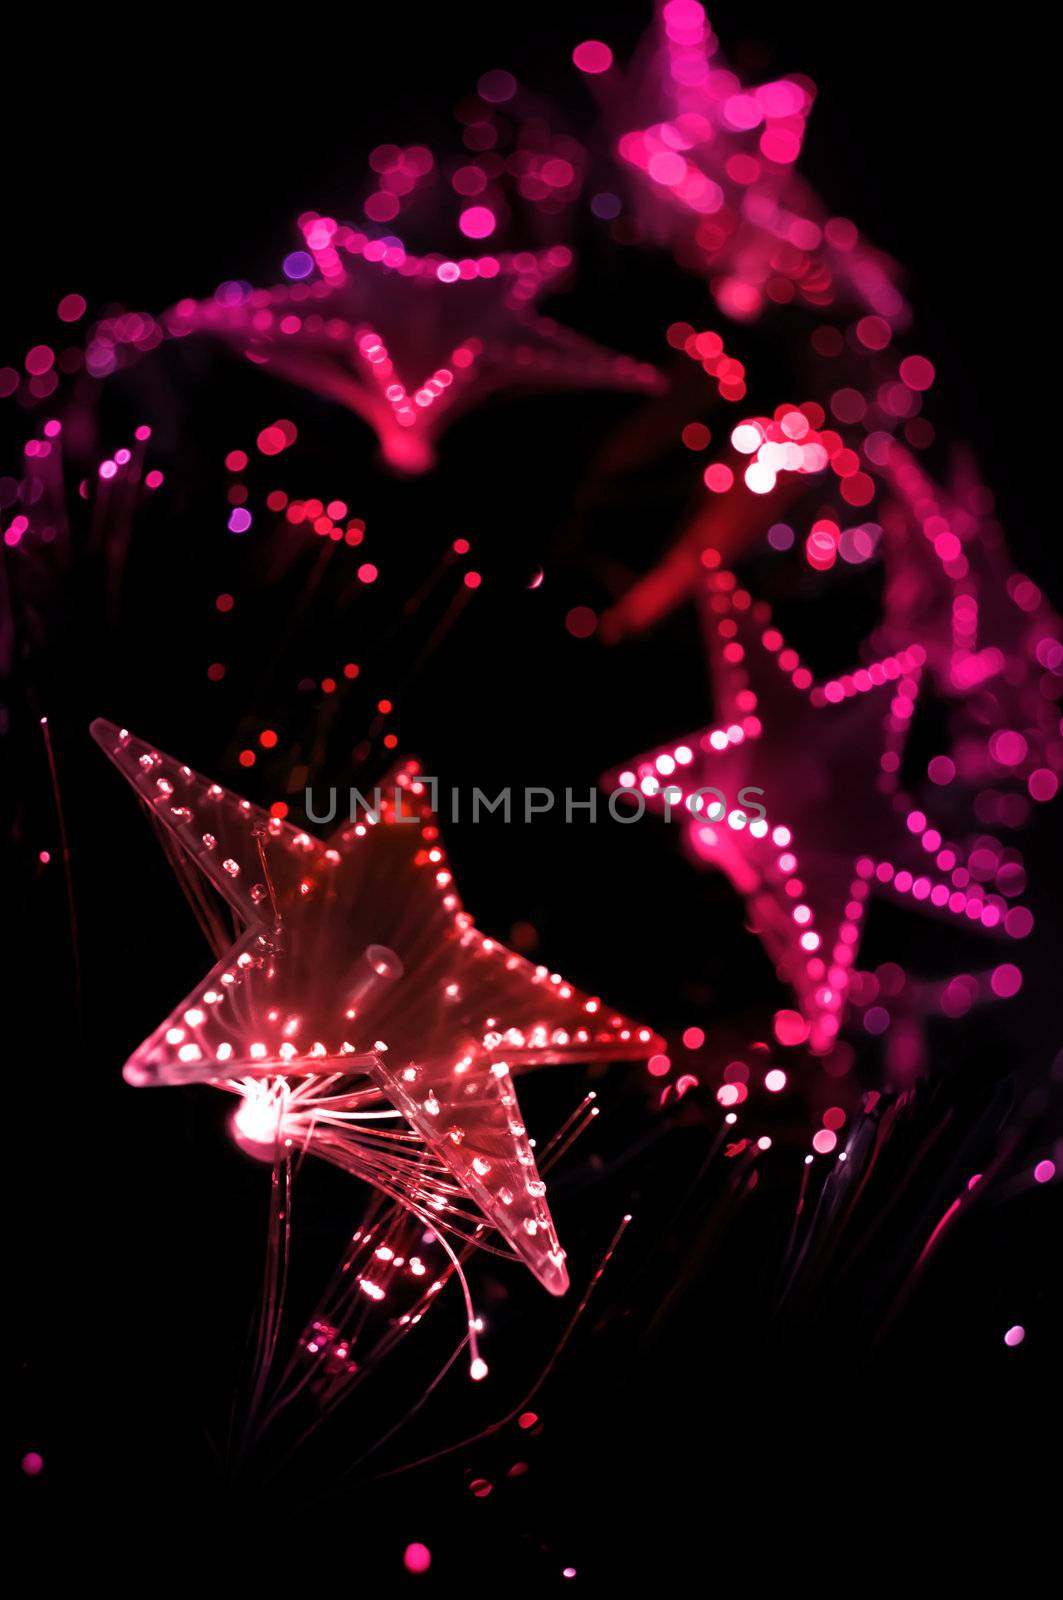 A view from the base of a Christmas tree with illuminated pink and red lights. Focus on foreground lights with black background.